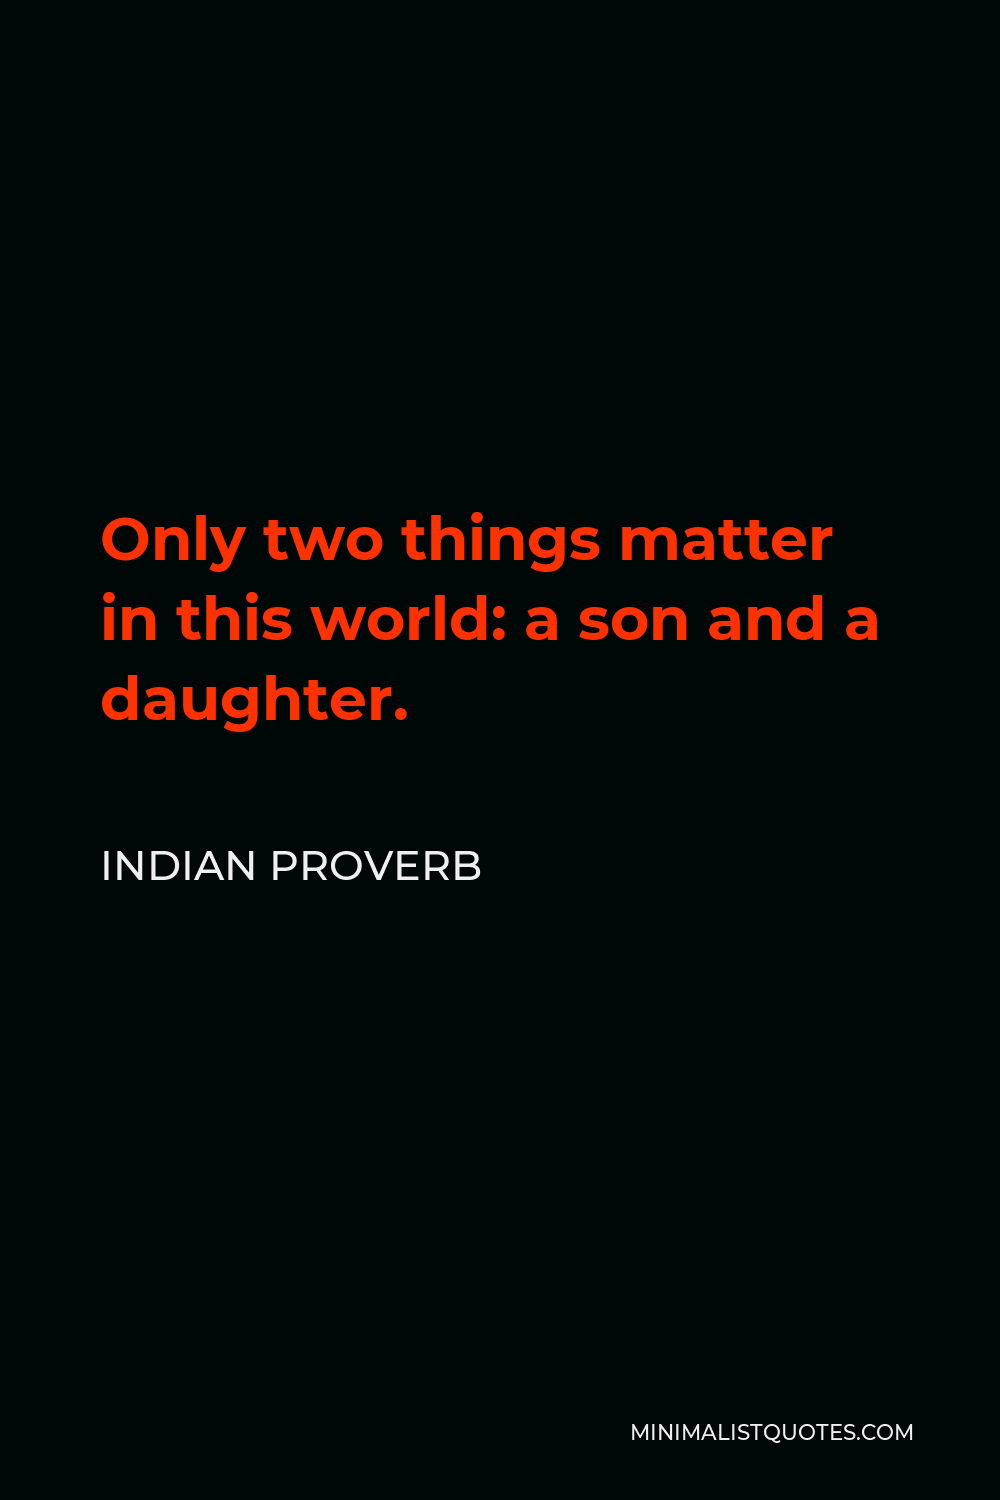 Indian Proverb Quote - Only two things matter in this world: a son and a daughter.